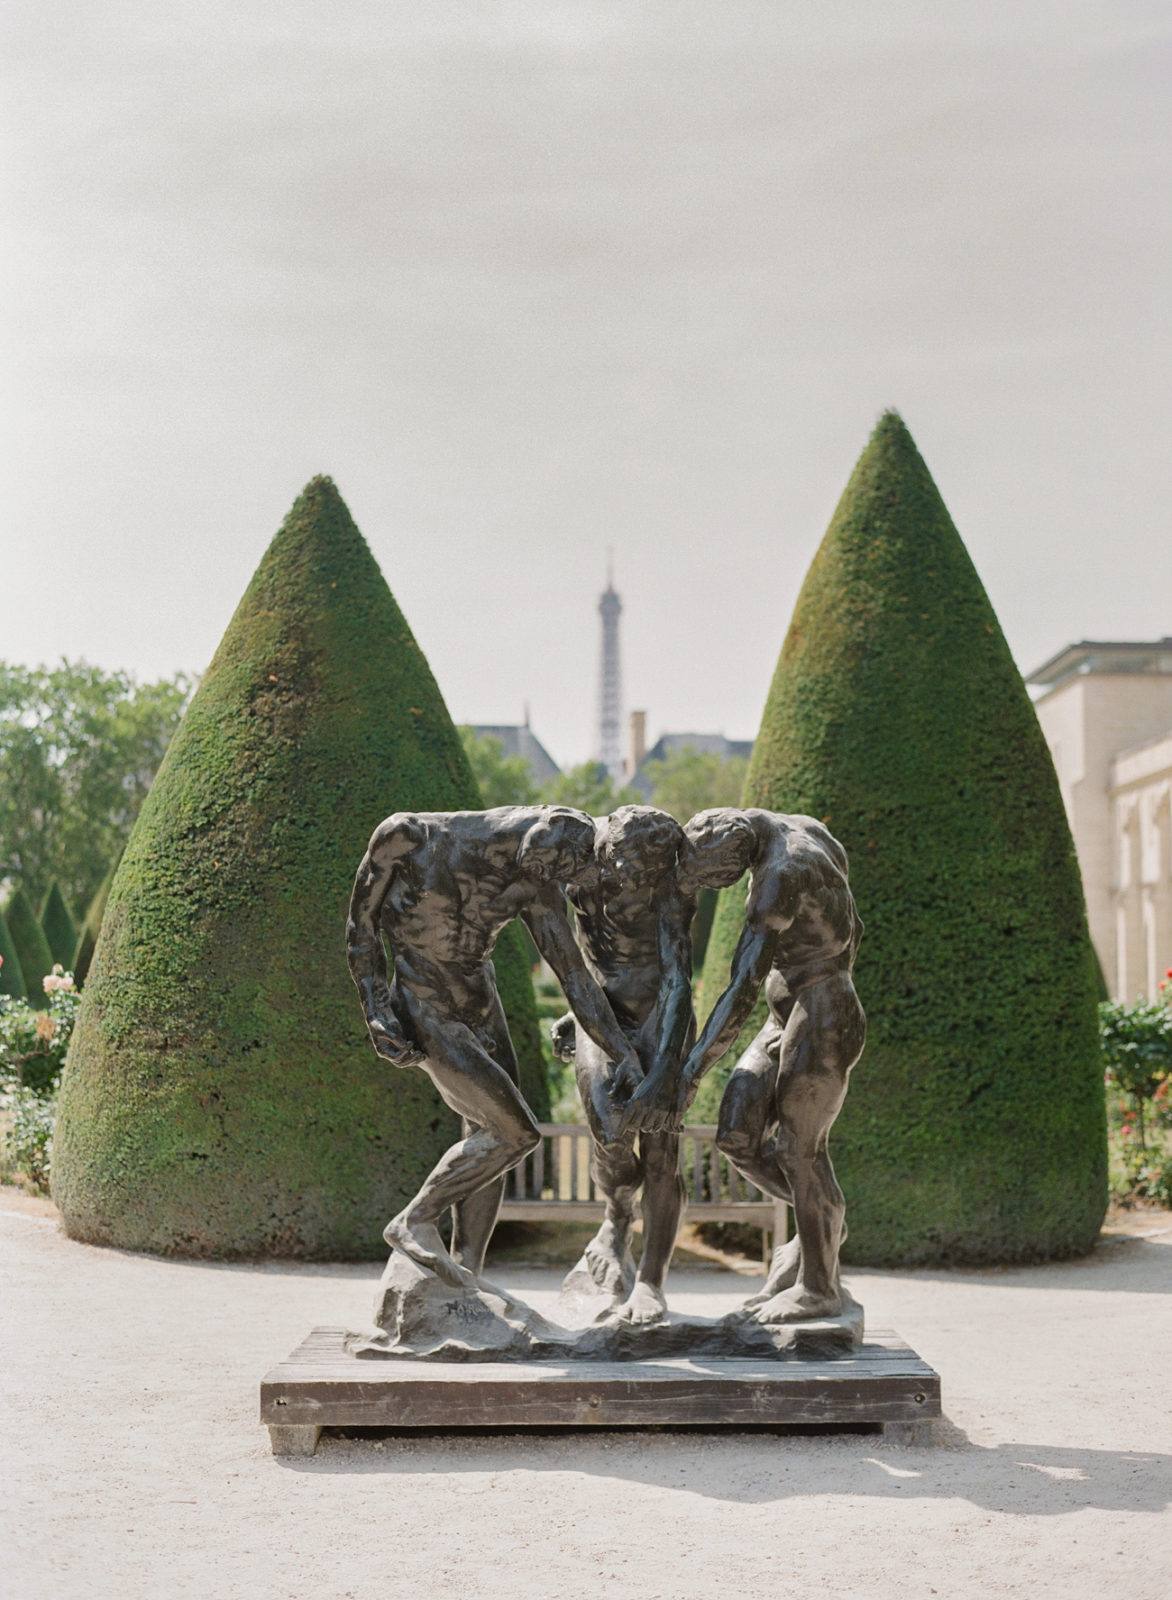 Musee Rodin Wedding Photography by Molly Carr Photography | Paris Fine Art Film Photographer | France Wedding Photographer | Luxury Wedding Europe